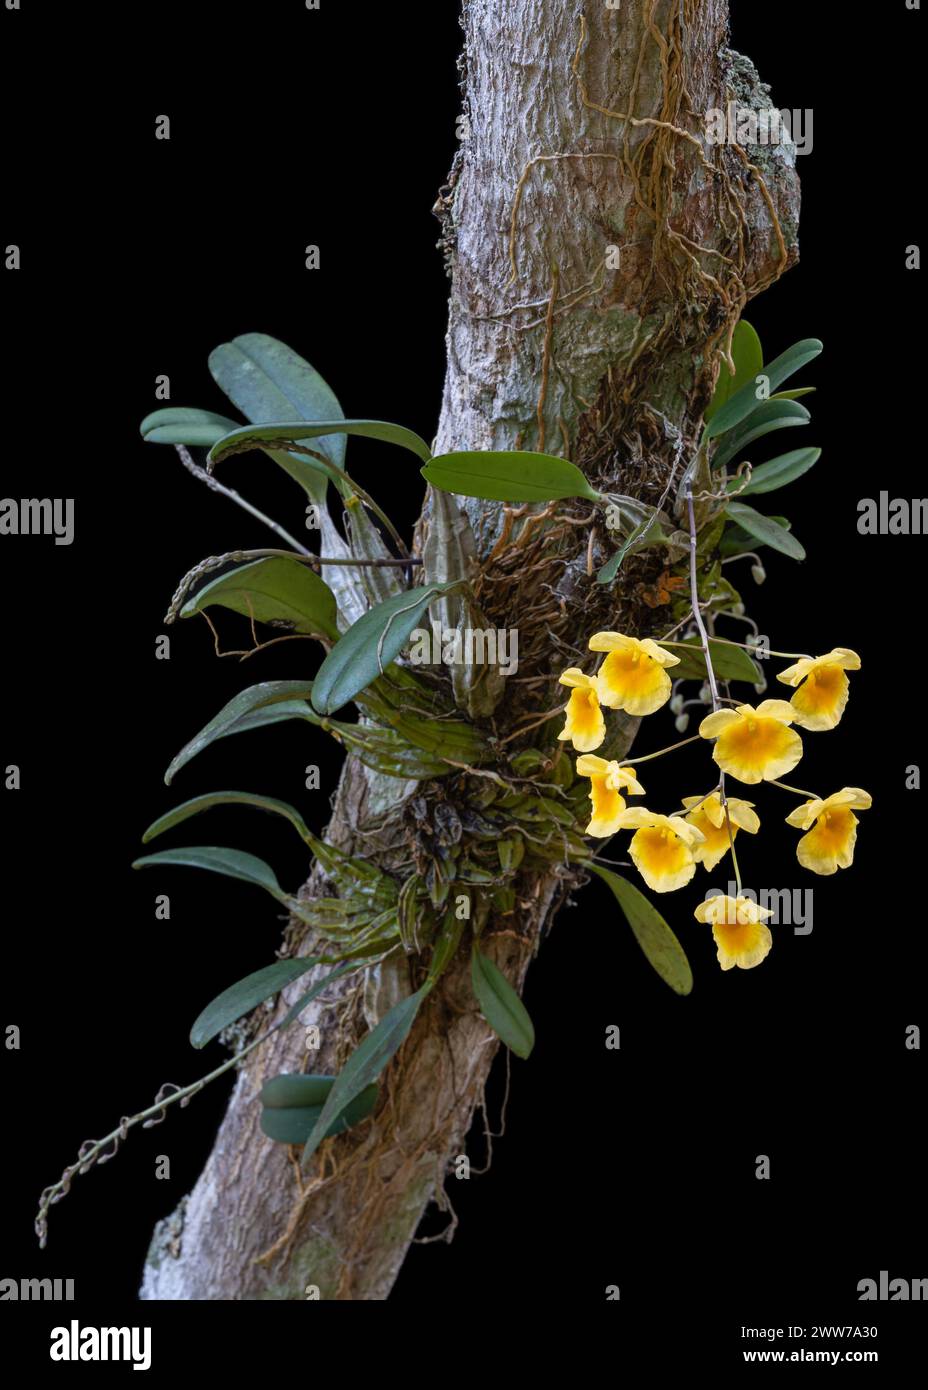 Closeup view of orchid species dendrobium lindleyi or Lindley's dendrobium growing on tree with yellow orange flowers isolated on black background Stock Photo